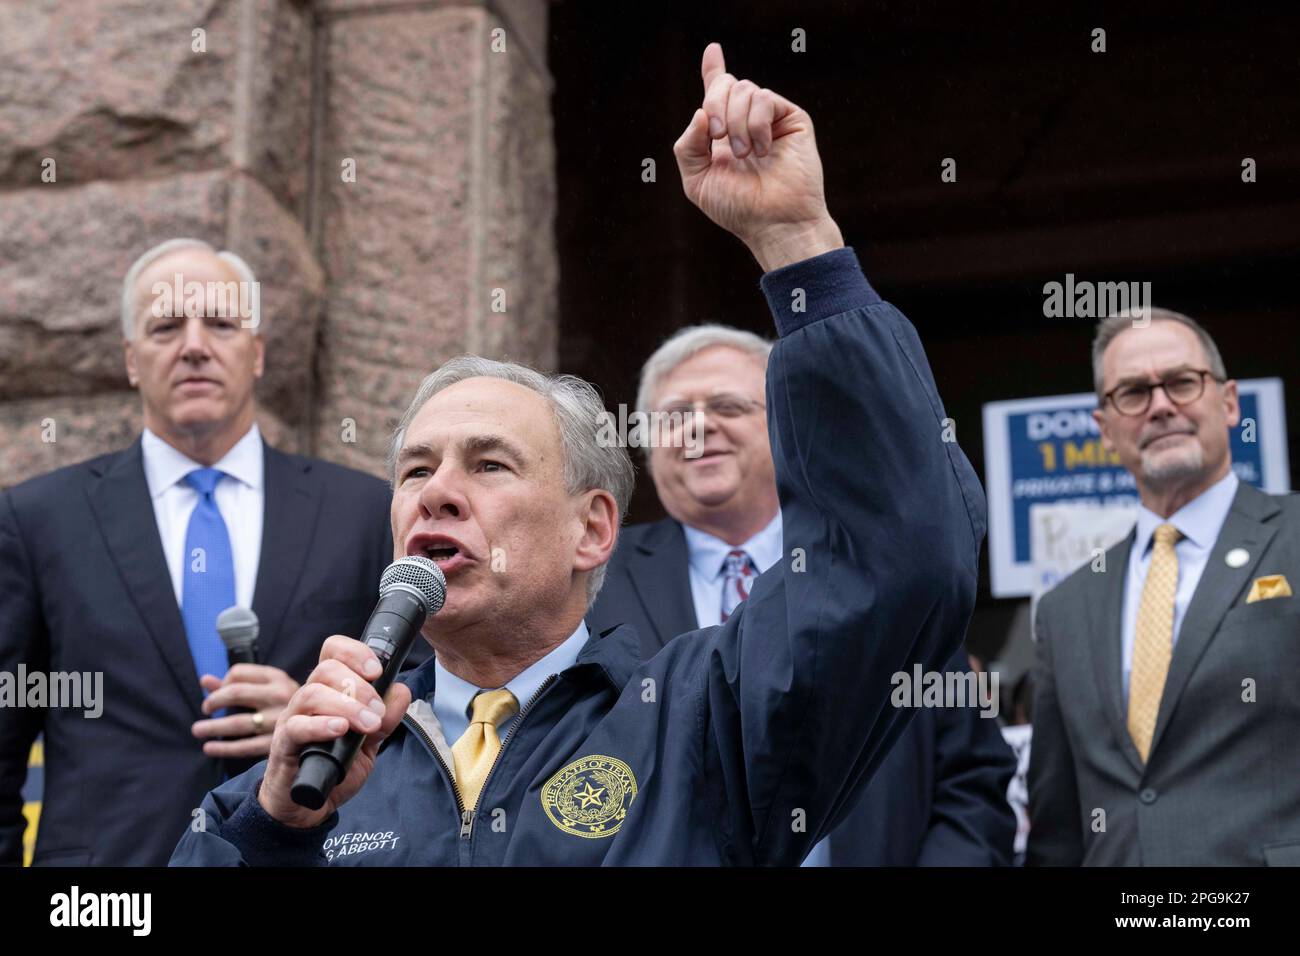 Republican Texas Gov. GREG ABBOTT waits as he headlines a rally for 'school choice' to a crowd of about 150 on the north steps of the Texas Capitol. Republican legislators have repeatedly tried to pass measures that would use public education money to fund vouchers that parents would use to bypass Texas public schools for private education. Behind Abbott are Republican lawmakers State Rep. JAMES FRANK, l, Sen. PAUL BETTENCOURT and Sen. KEVIN SPARKS. Credit: Bob Daemmrich/Alamy Live News Stock Photo